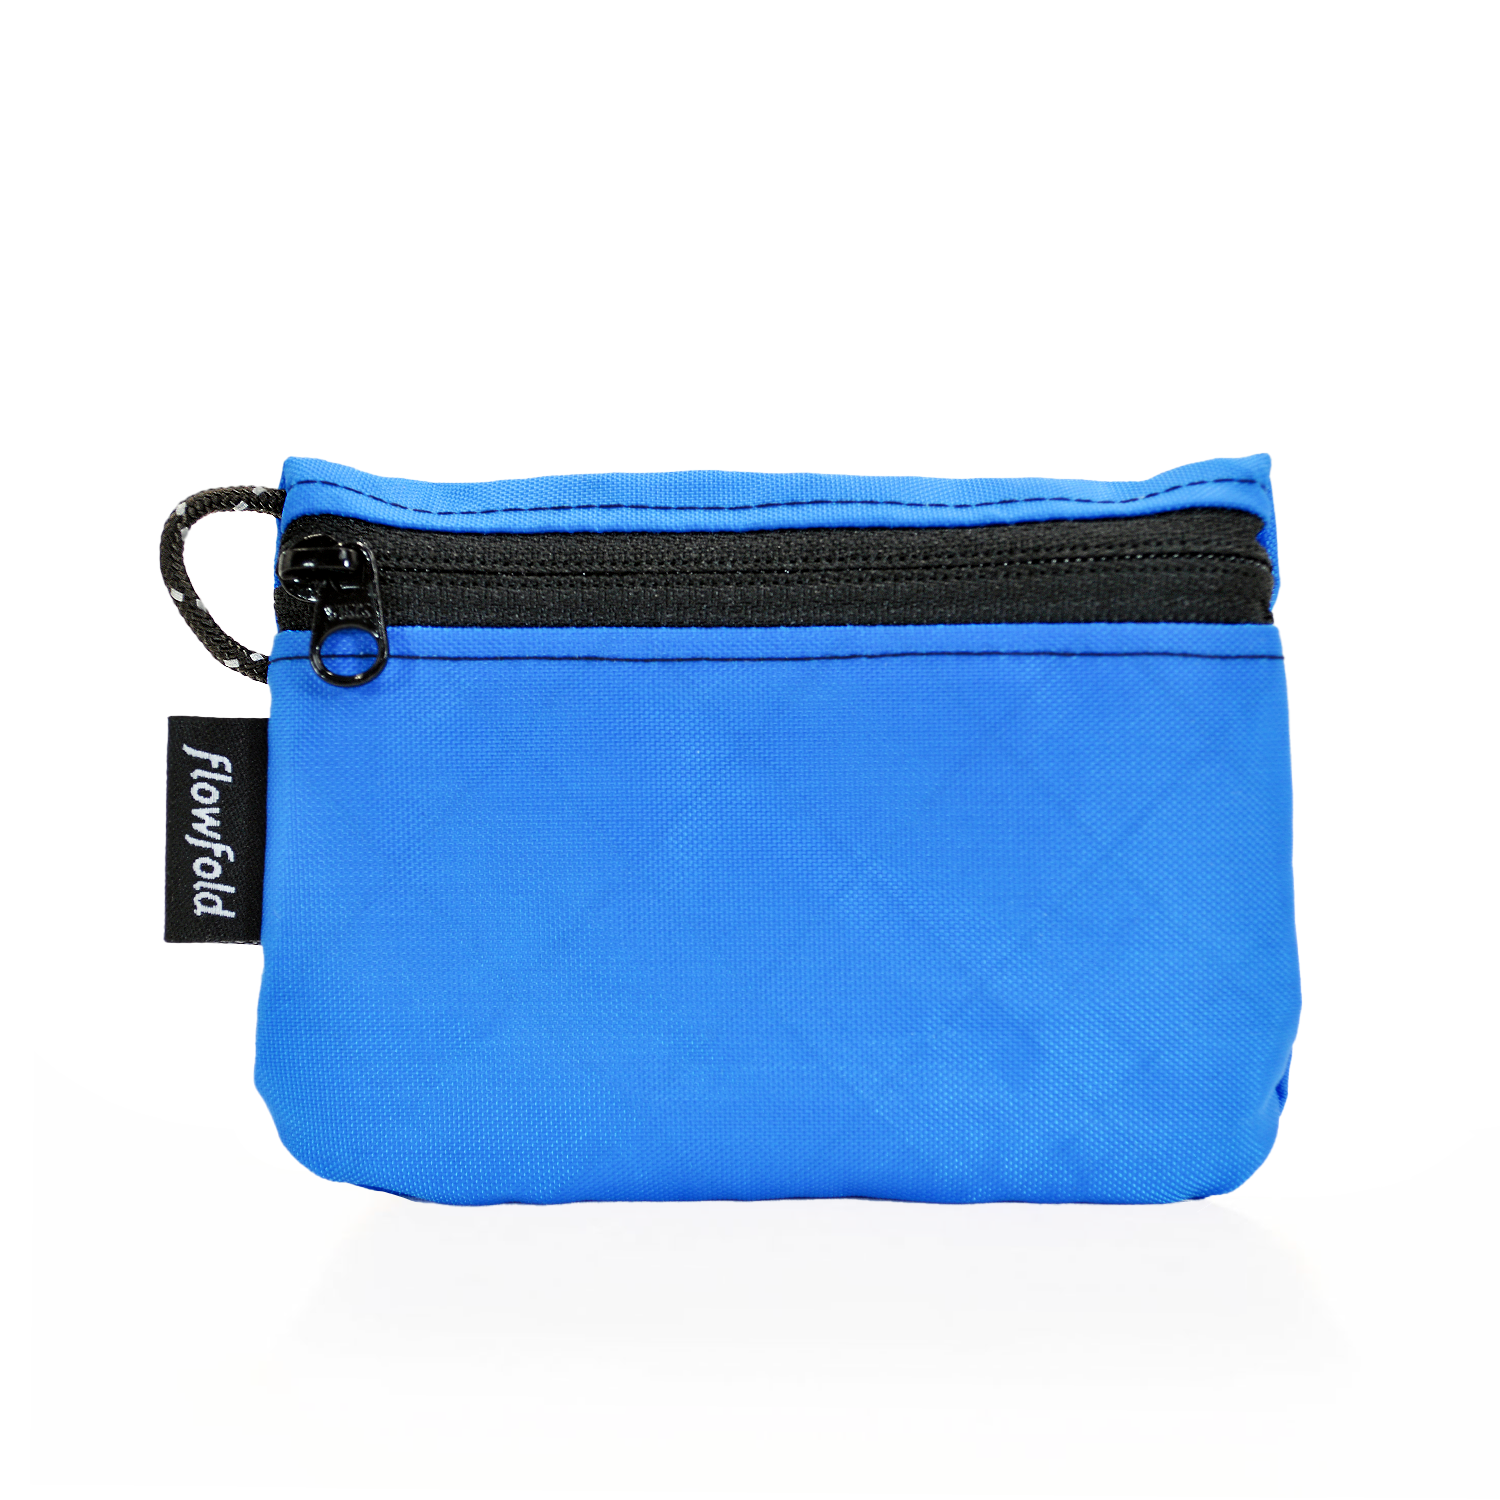 iconic Cottony card holder, Mini Zipper Pouch Water Repellent Small  Zippered Pouches for Keys, ID, Cards & AirPods Case